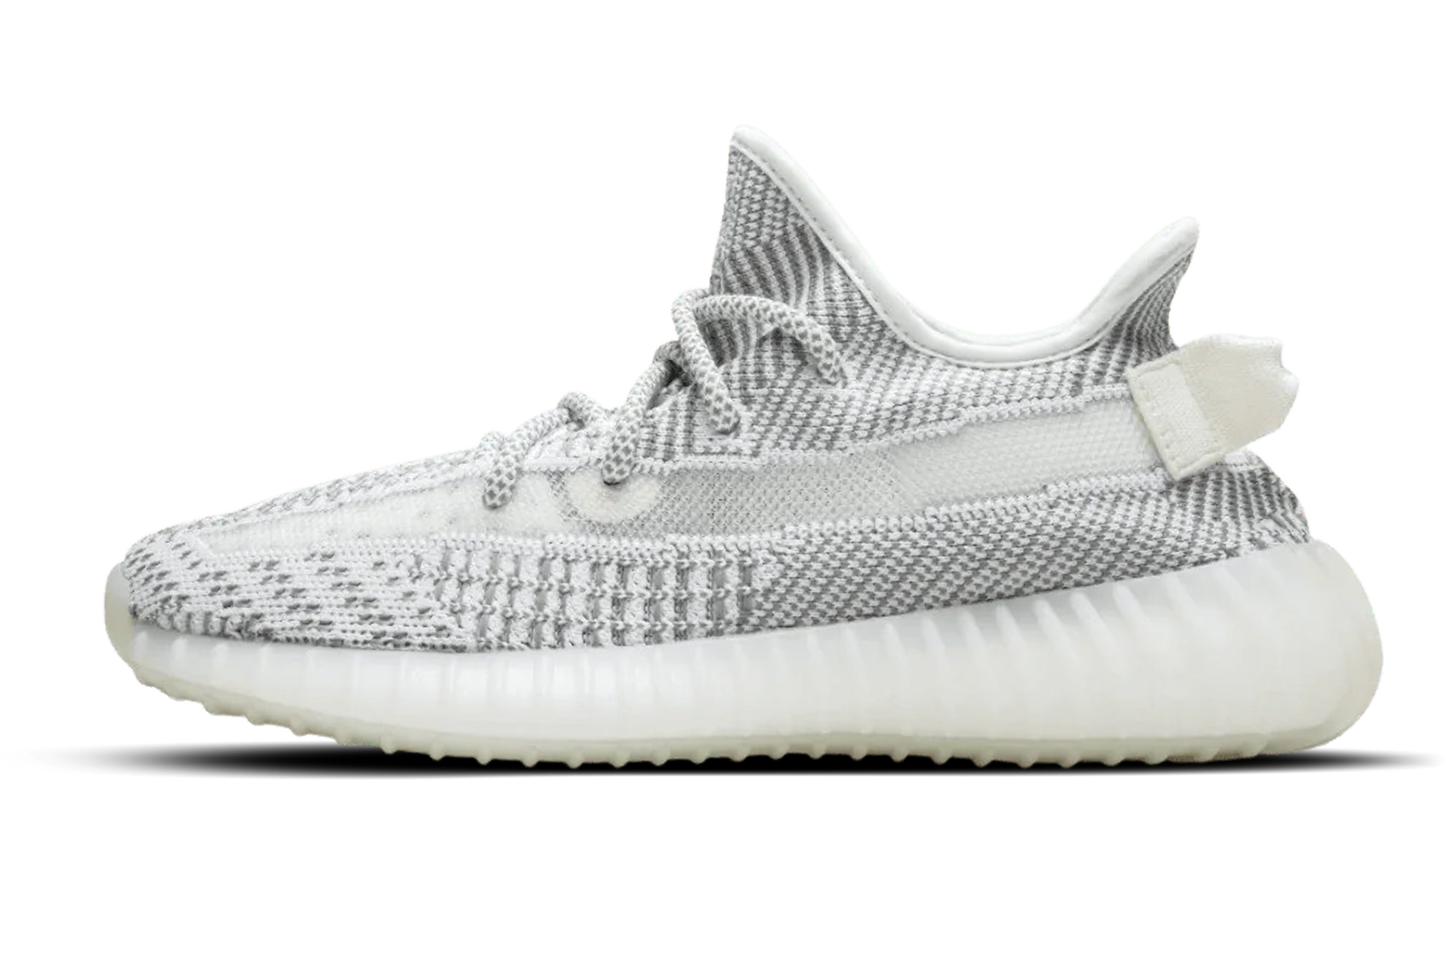 adidas Yeezy Boost 350 V2 'Static' Non-Reflective